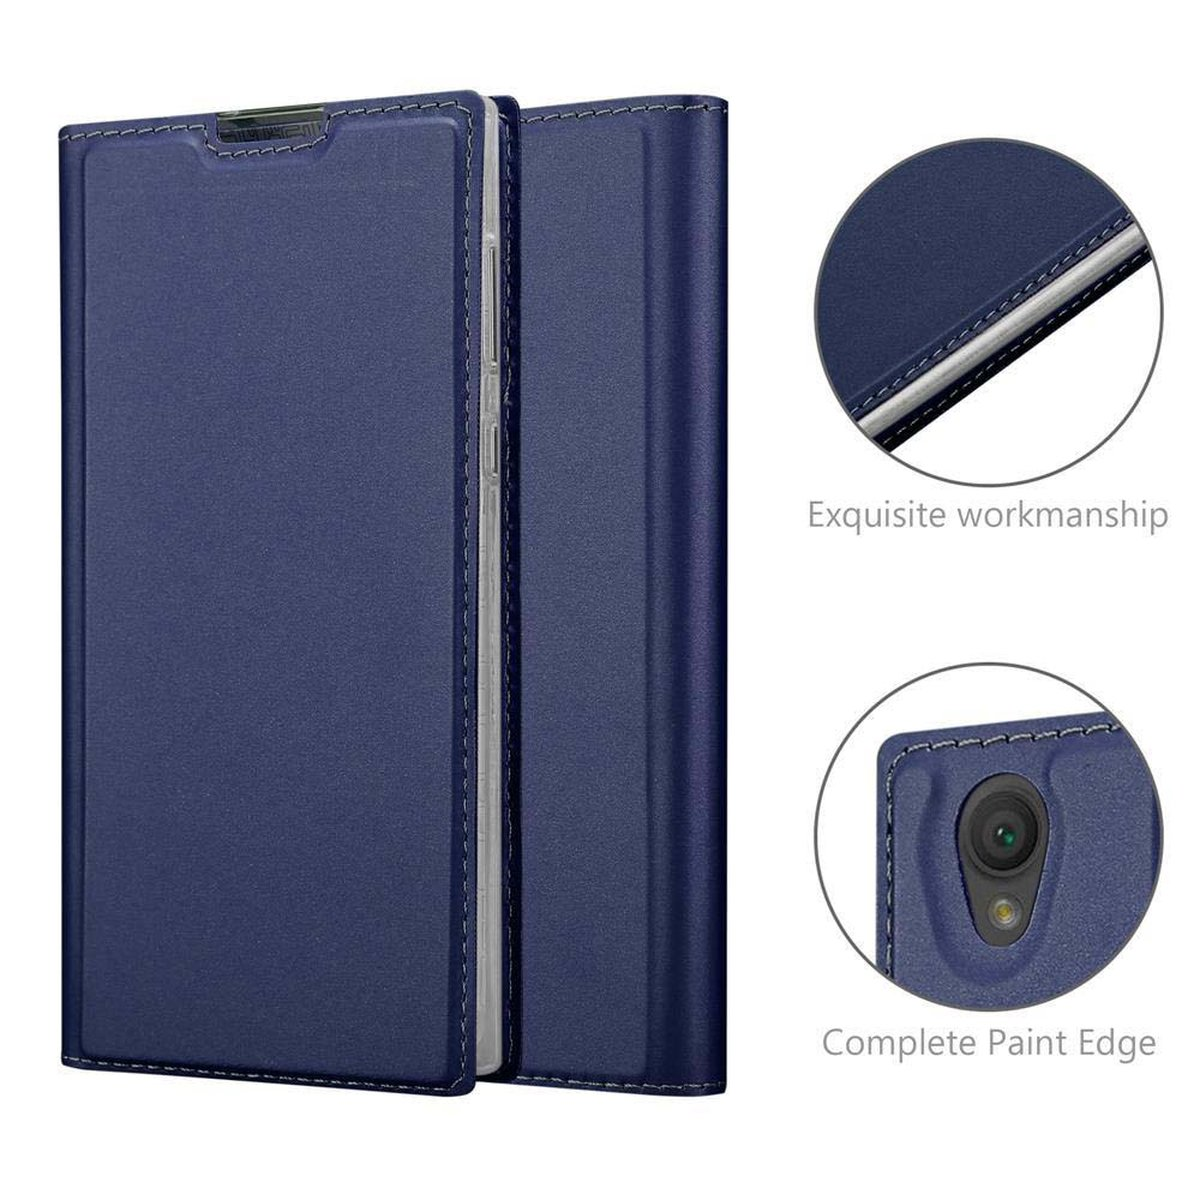 Classy CLASSY Style, L1, Xperia Book Sony, BLAU Bookcover, CADORABO Handyhülle DUNKEL